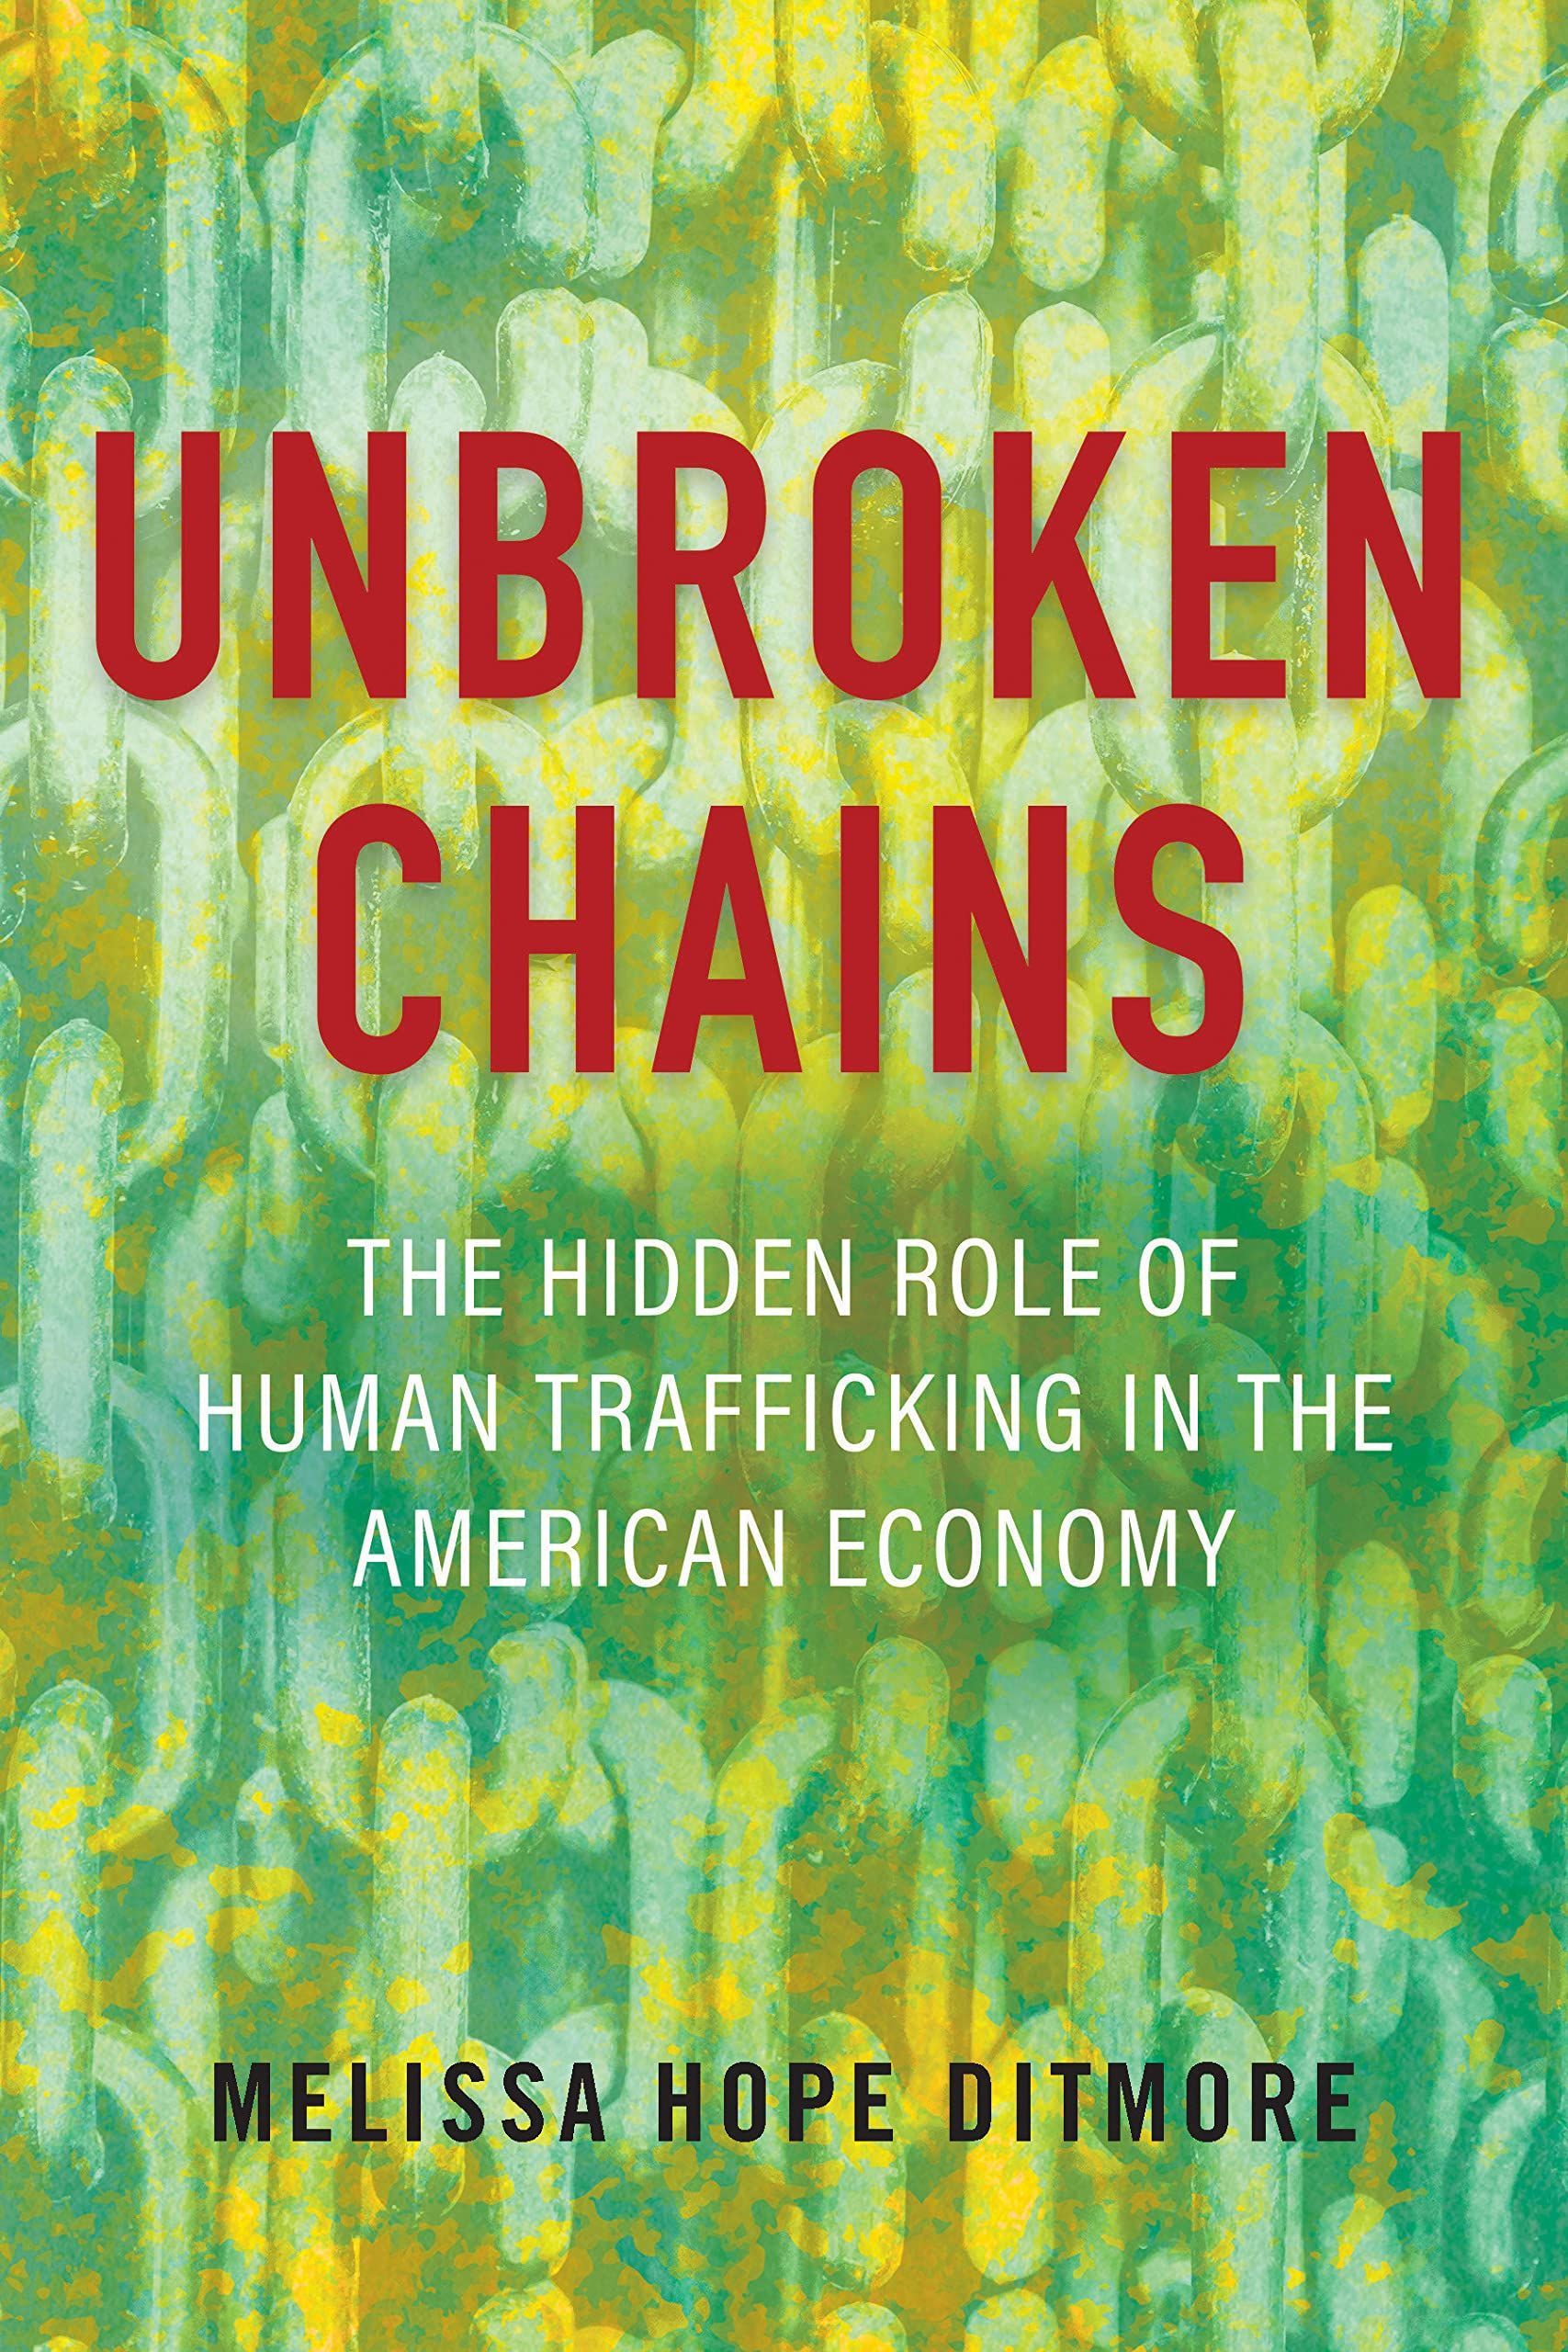 Economies of Human Trafficking: A Conversation with Melissa Hope Ditmore